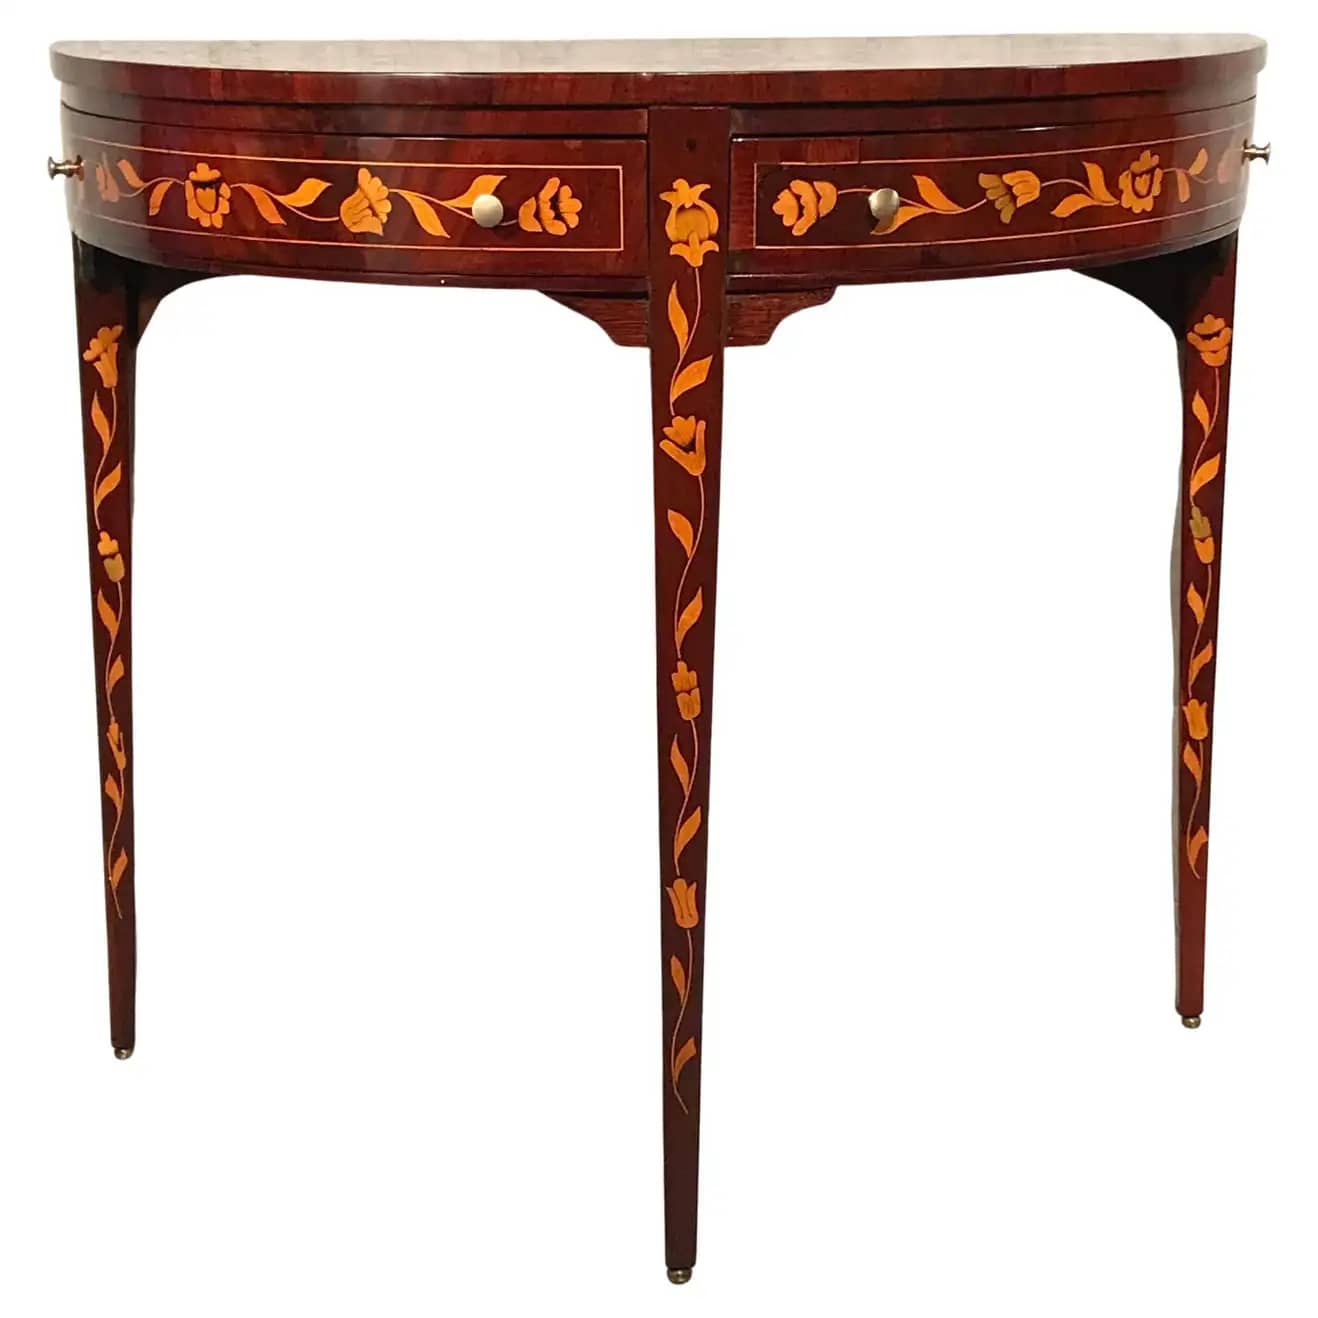 The Demilune Table: Exploring a Timeless Royal Favorite